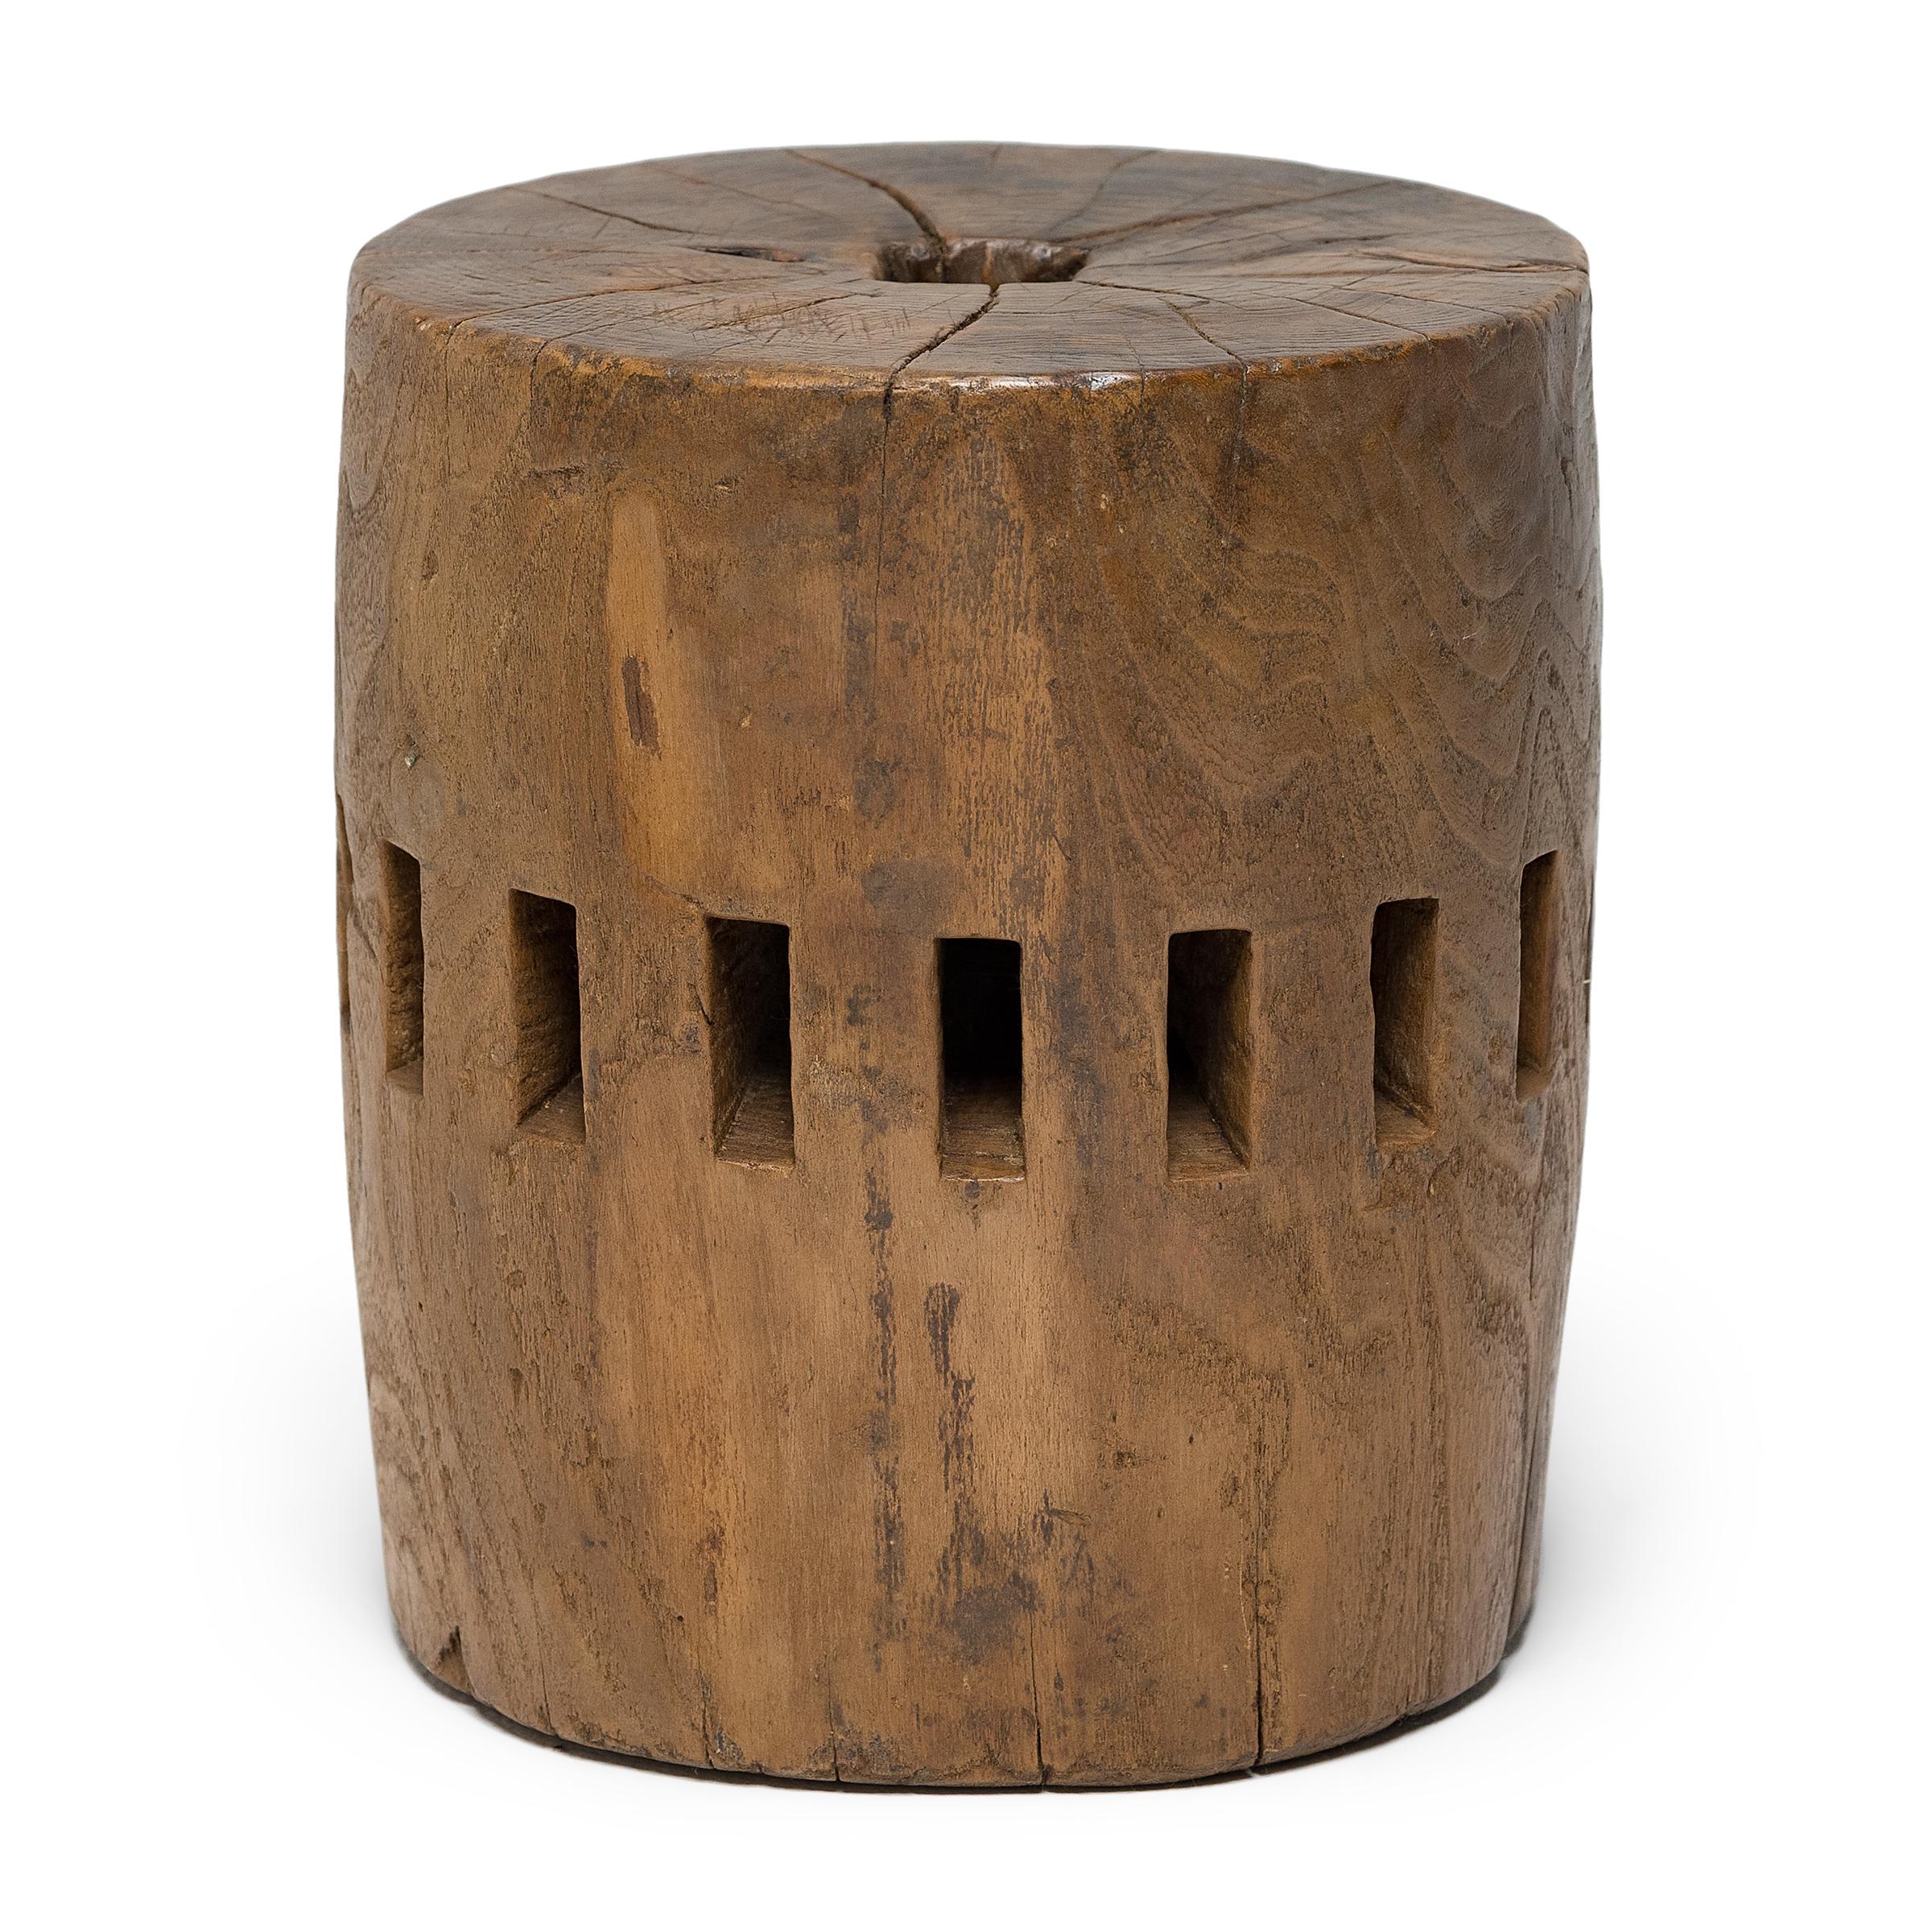 Carved from a single block of Elmwood, this unusual piece was once part of the central wheel shaft of a Qing-dynasty grain mill. Each slot once secured a peg of a large water wheel, which harnessed river currents to draw a millstone across grain